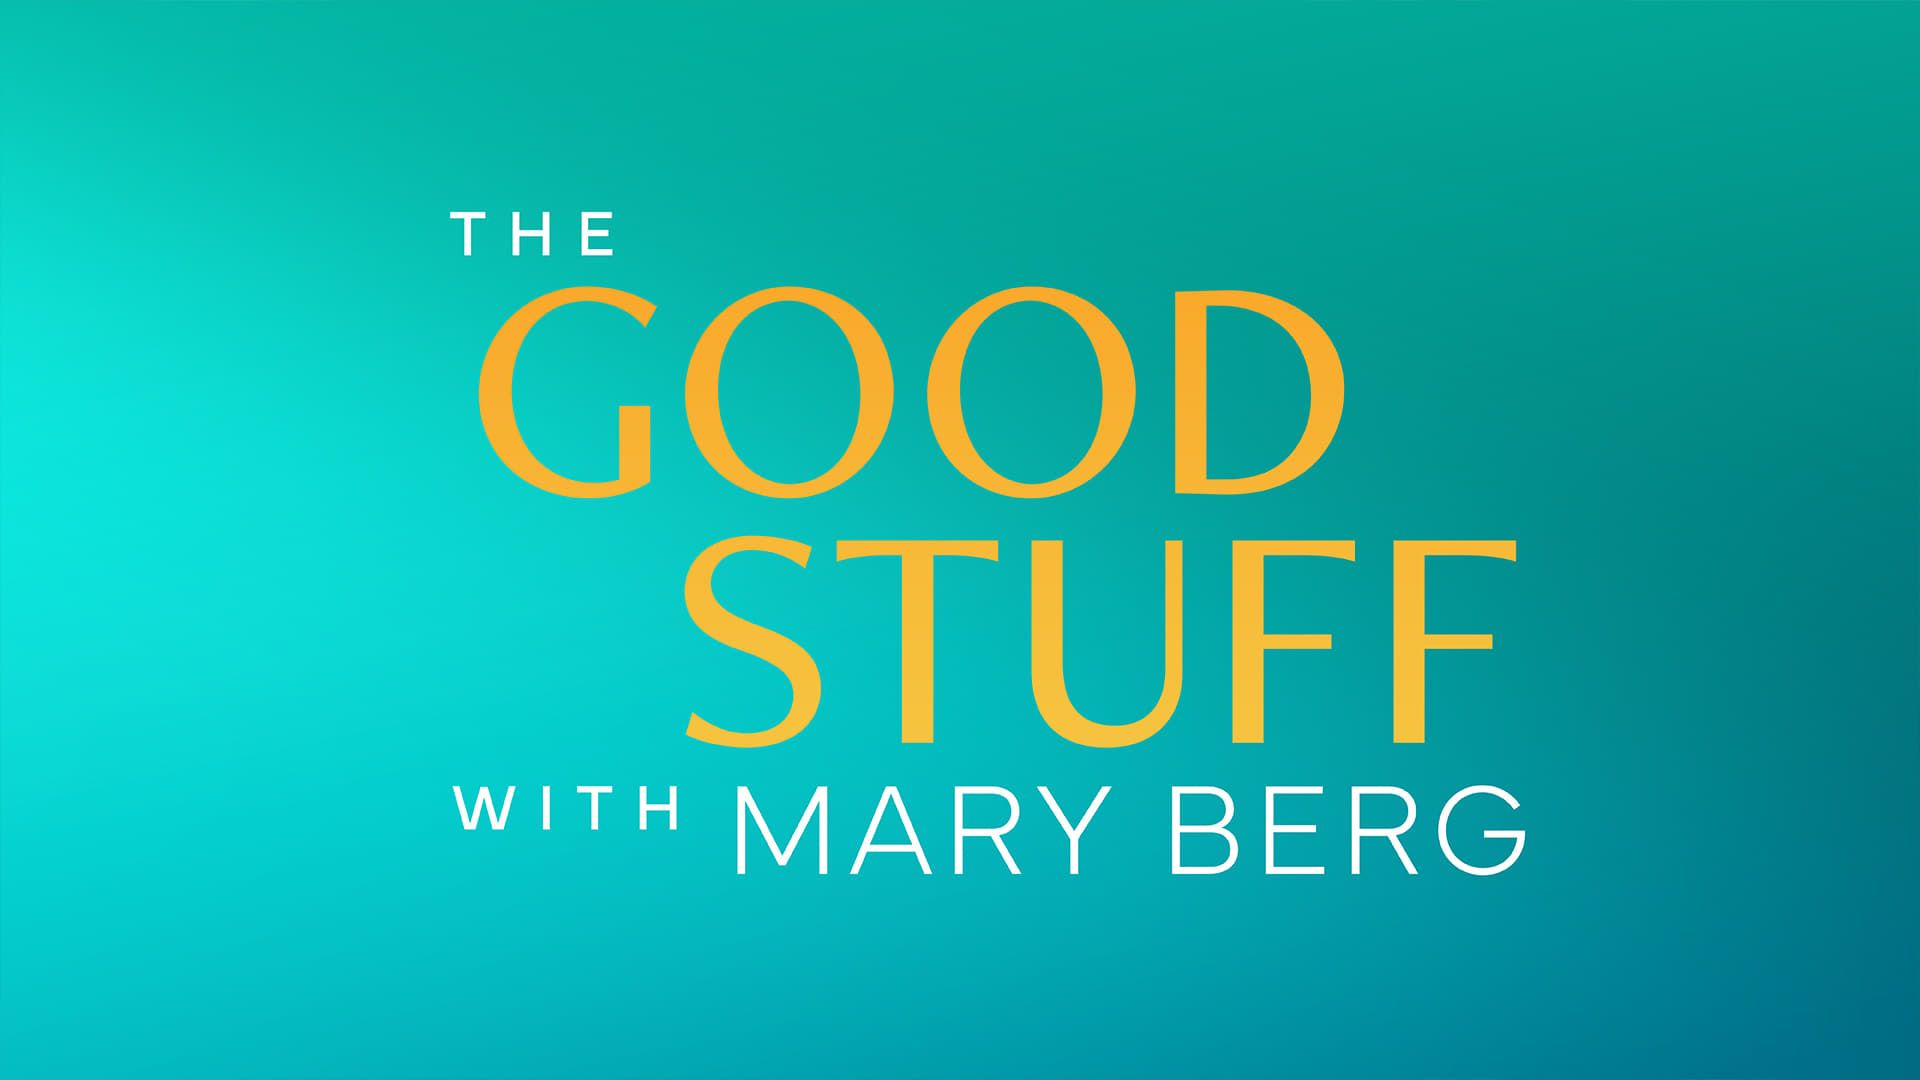 The Good Stuff with Mary Berg background